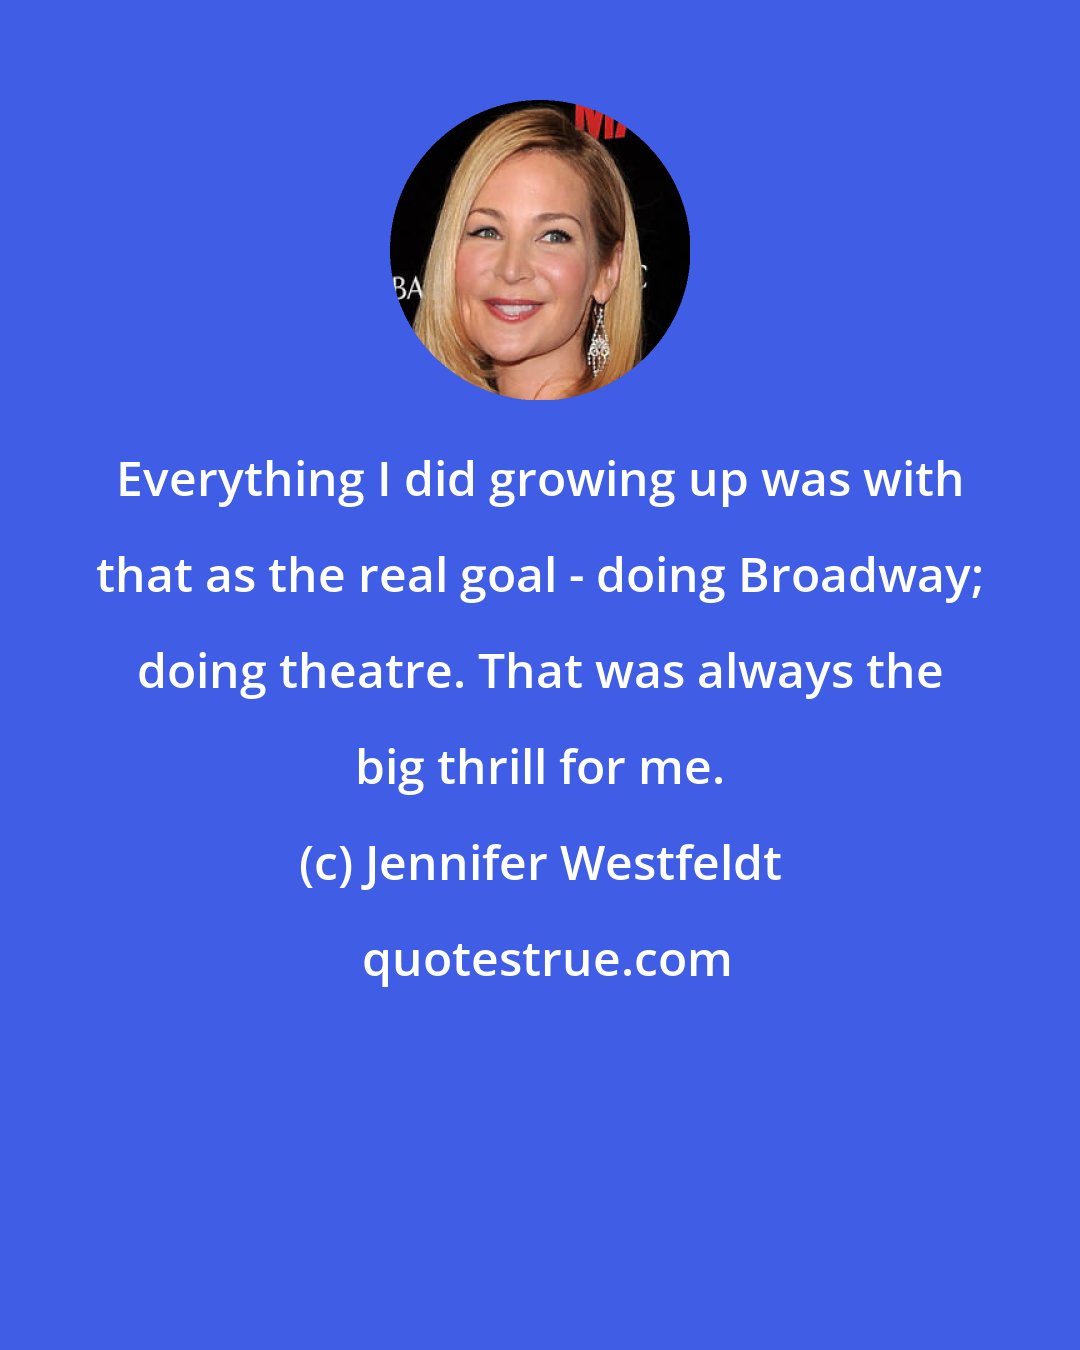 Jennifer Westfeldt: Everything I did growing up was with that as the real goal - doing Broadway; doing theatre. That was always the big thrill for me.